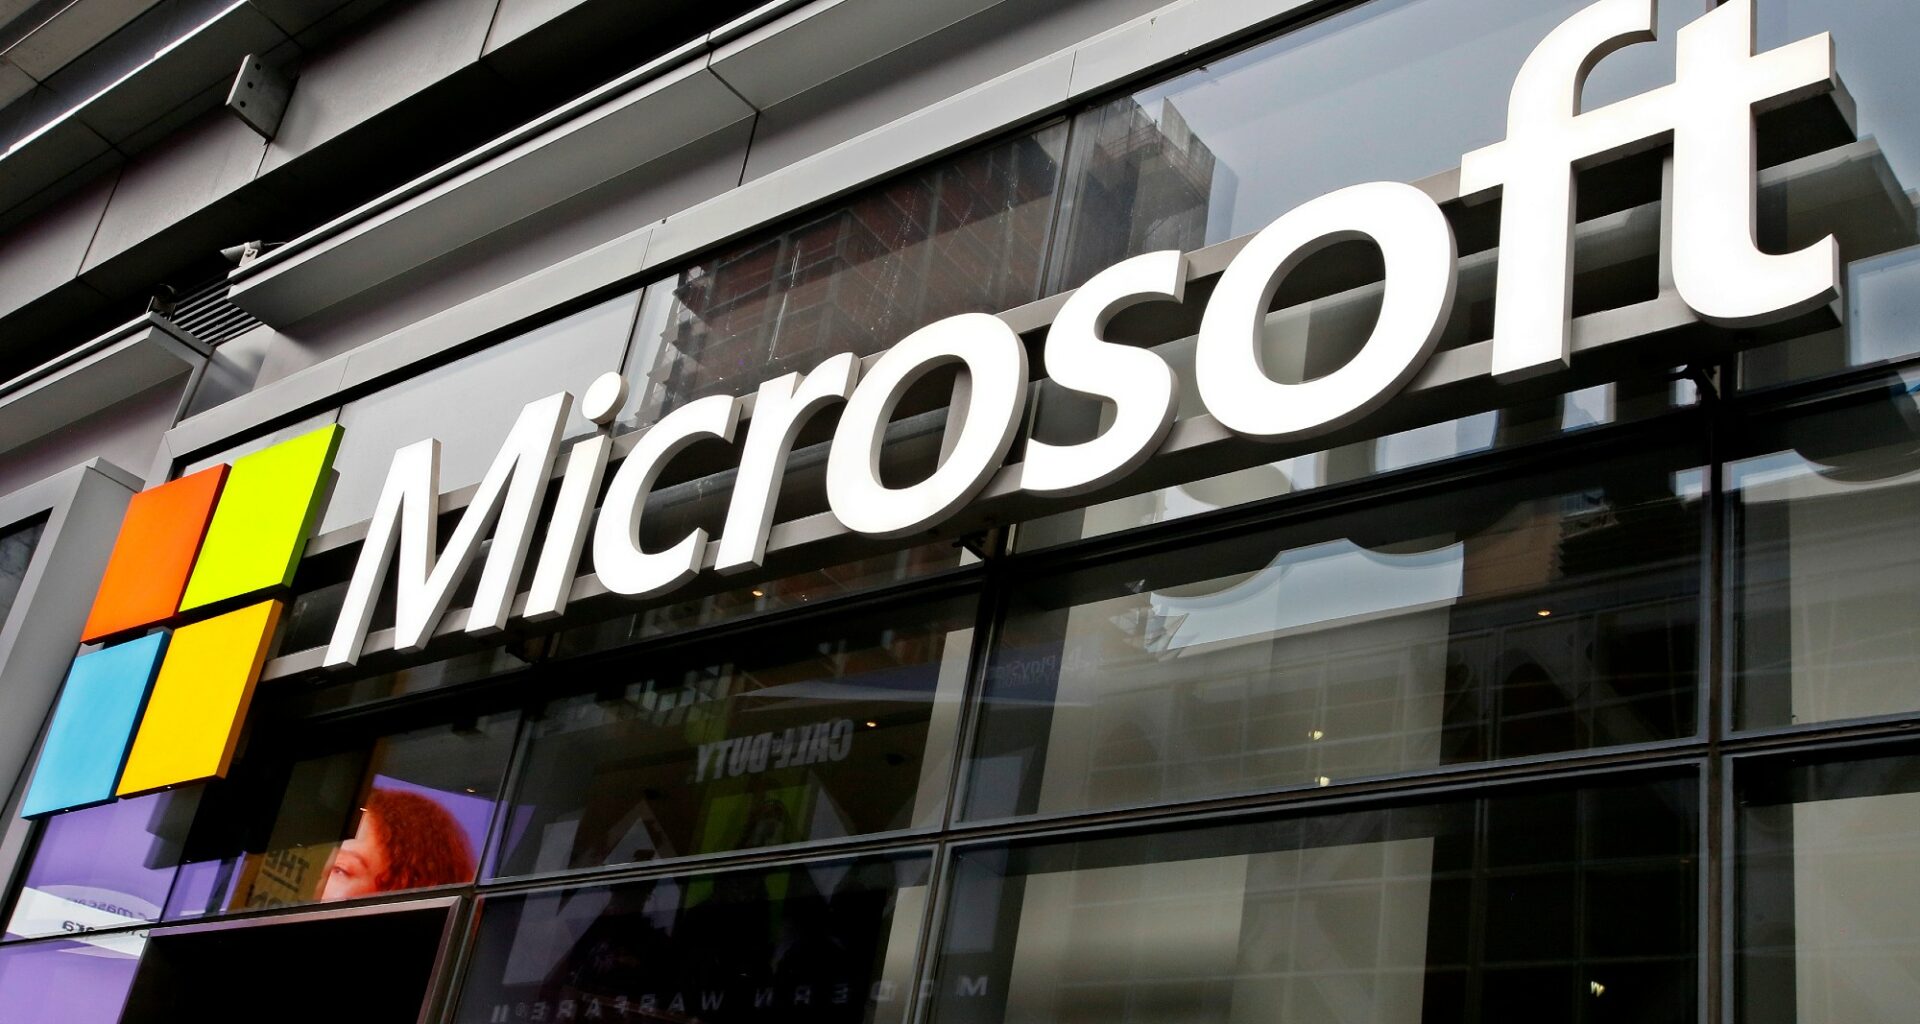 The EU is Expected to Approve Microsoft's Acquisition of Activision Blizzard.